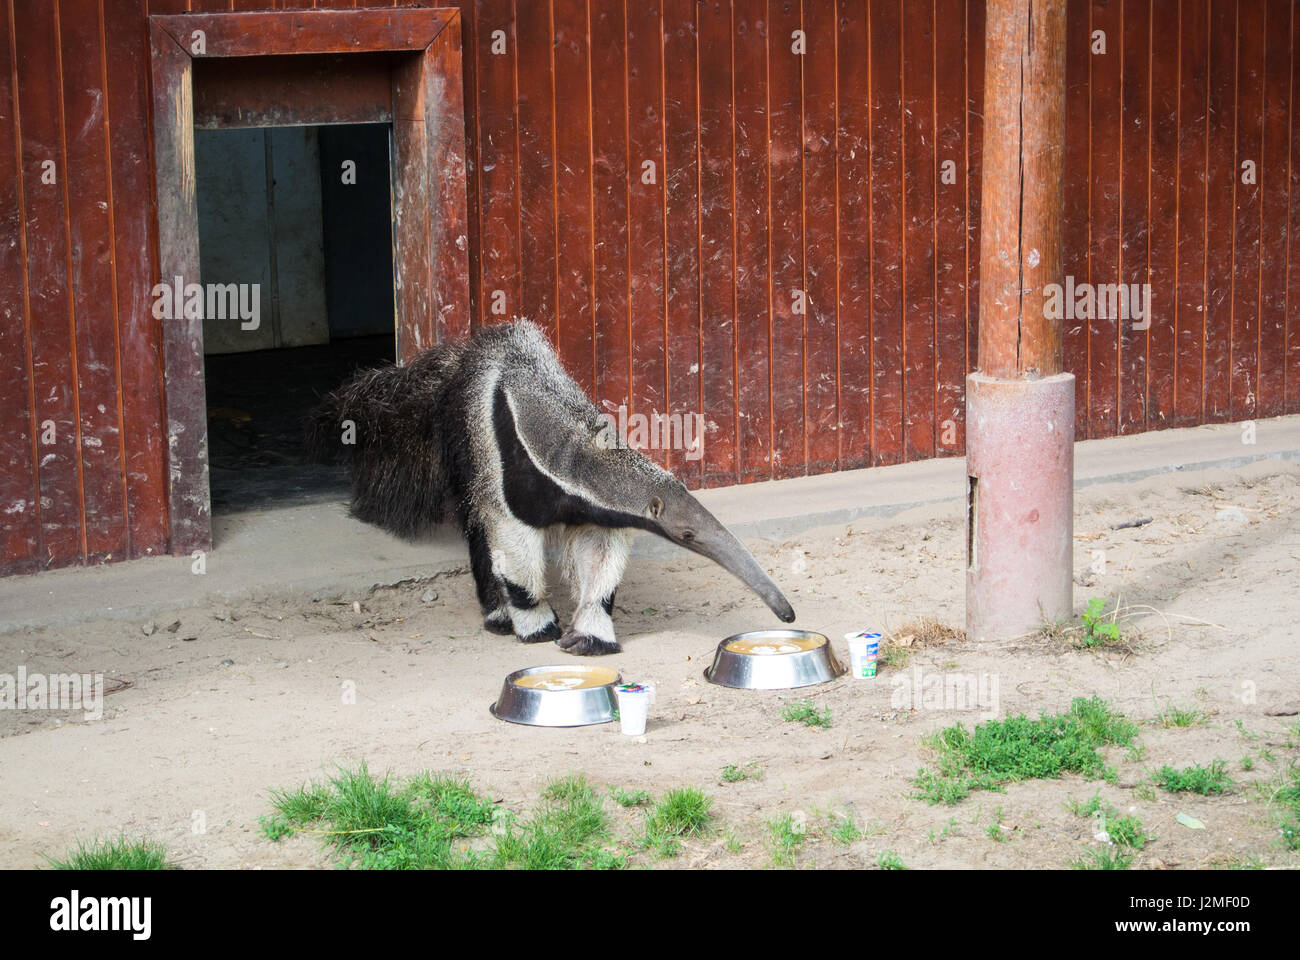 A giant anteater eats from a plate at Budapest zoo, Hungary. Stock Photo